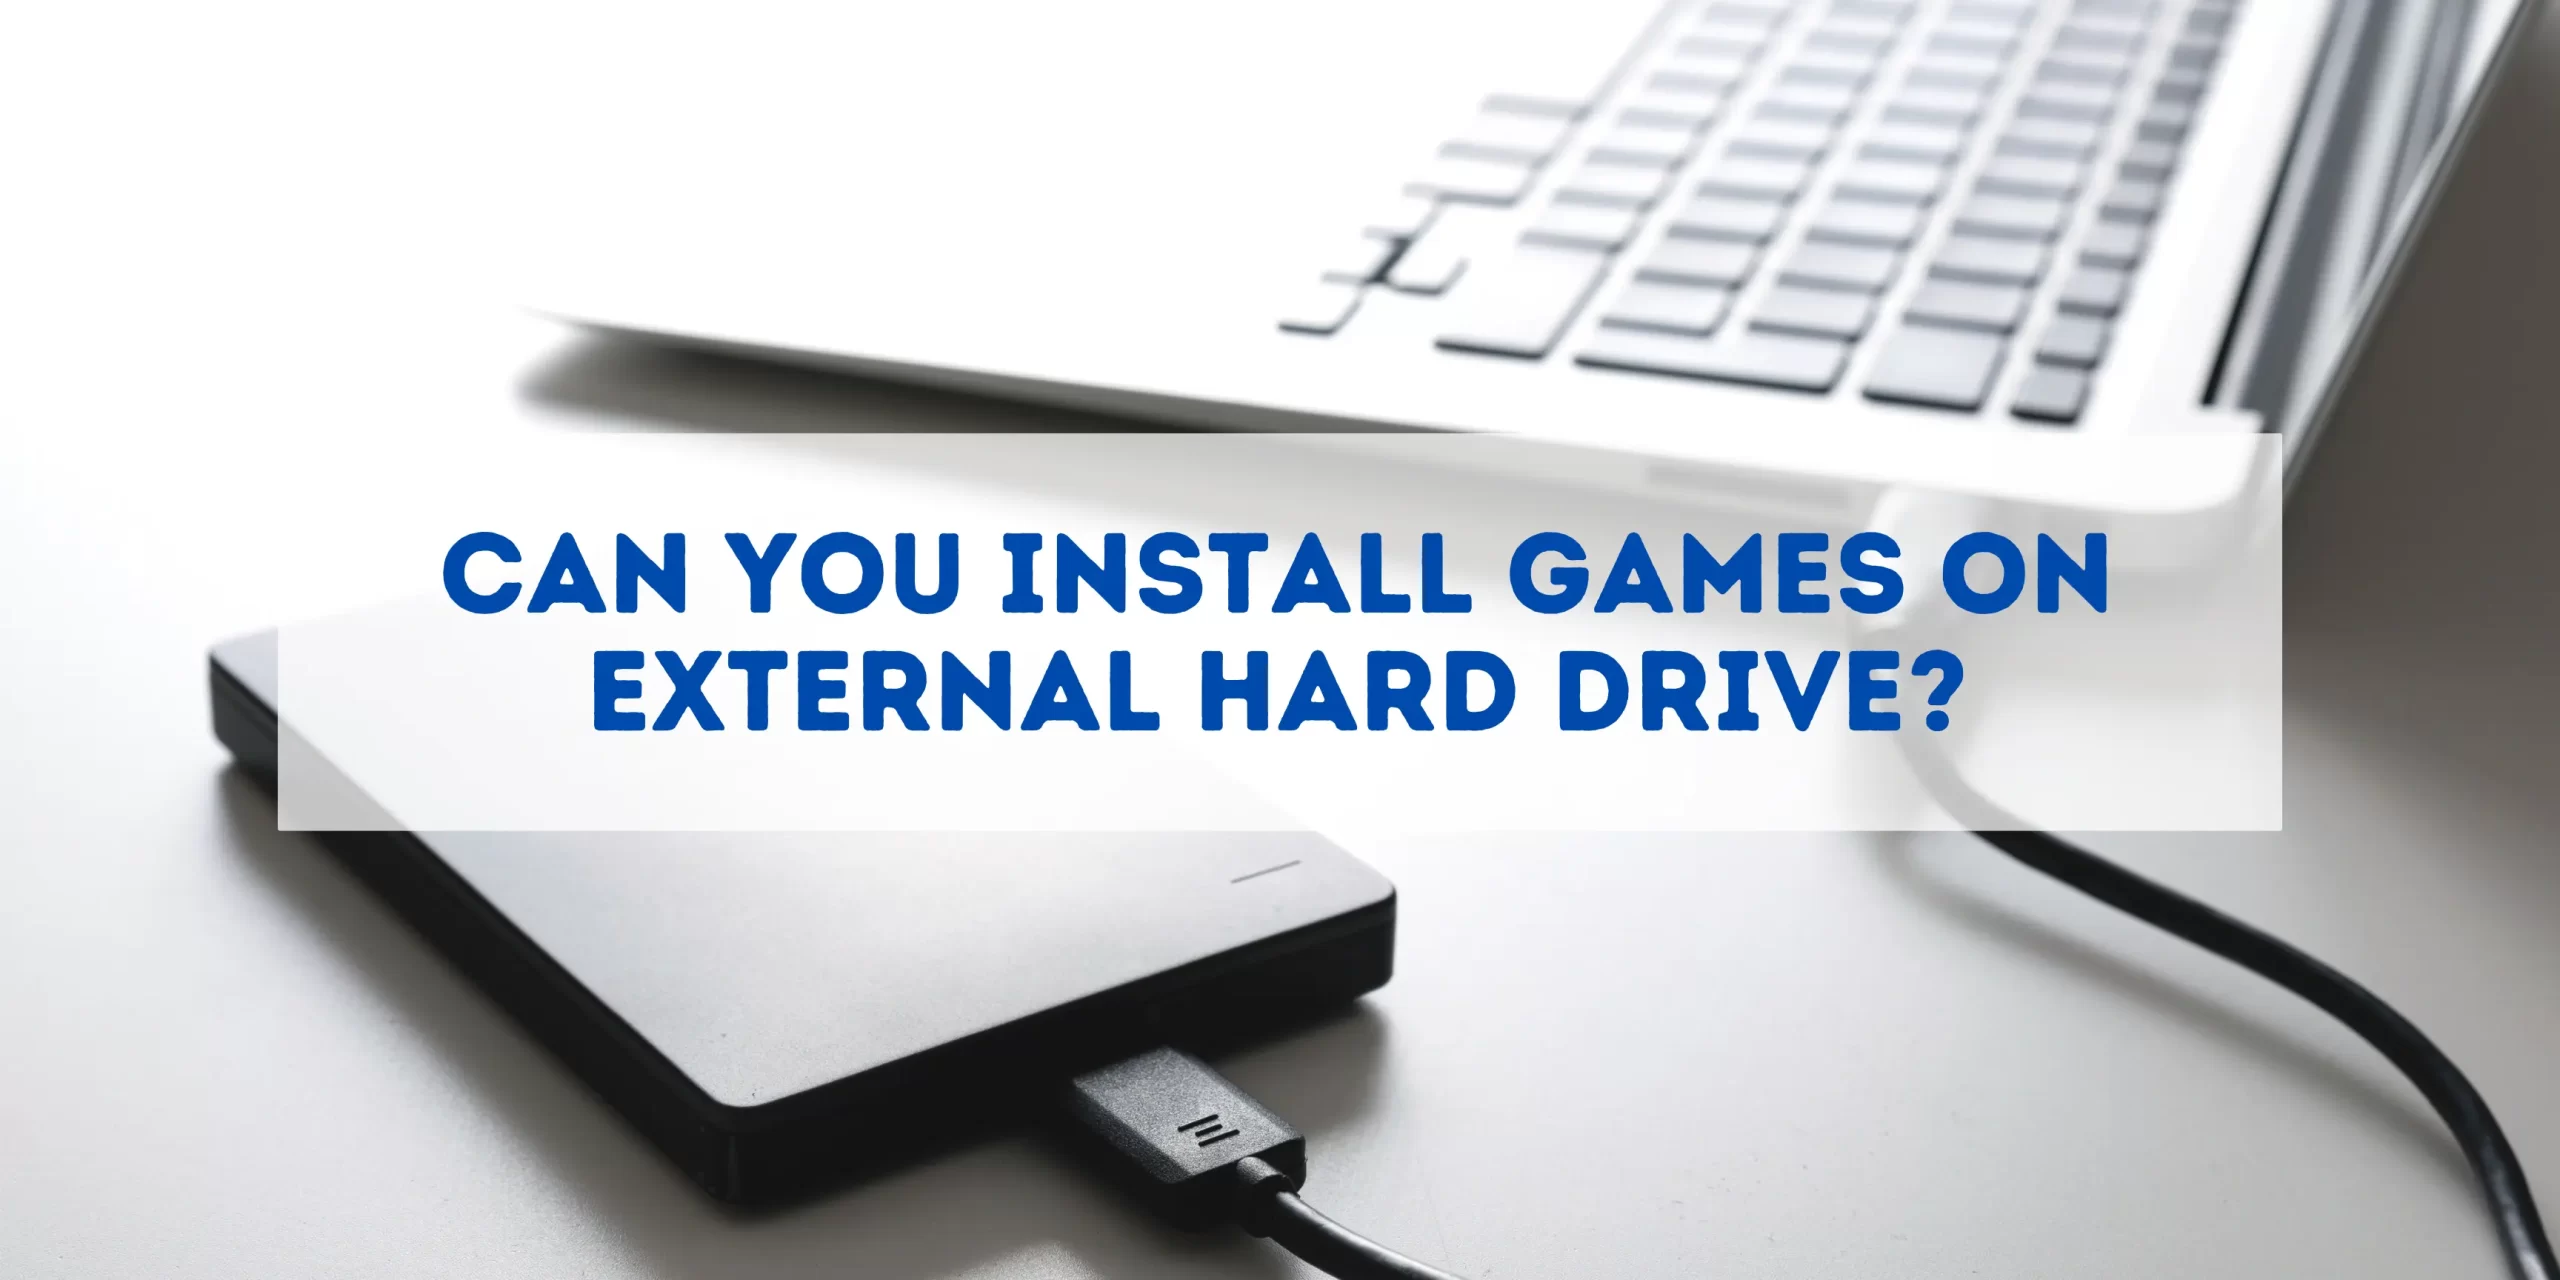 can you install games on an external hard drive